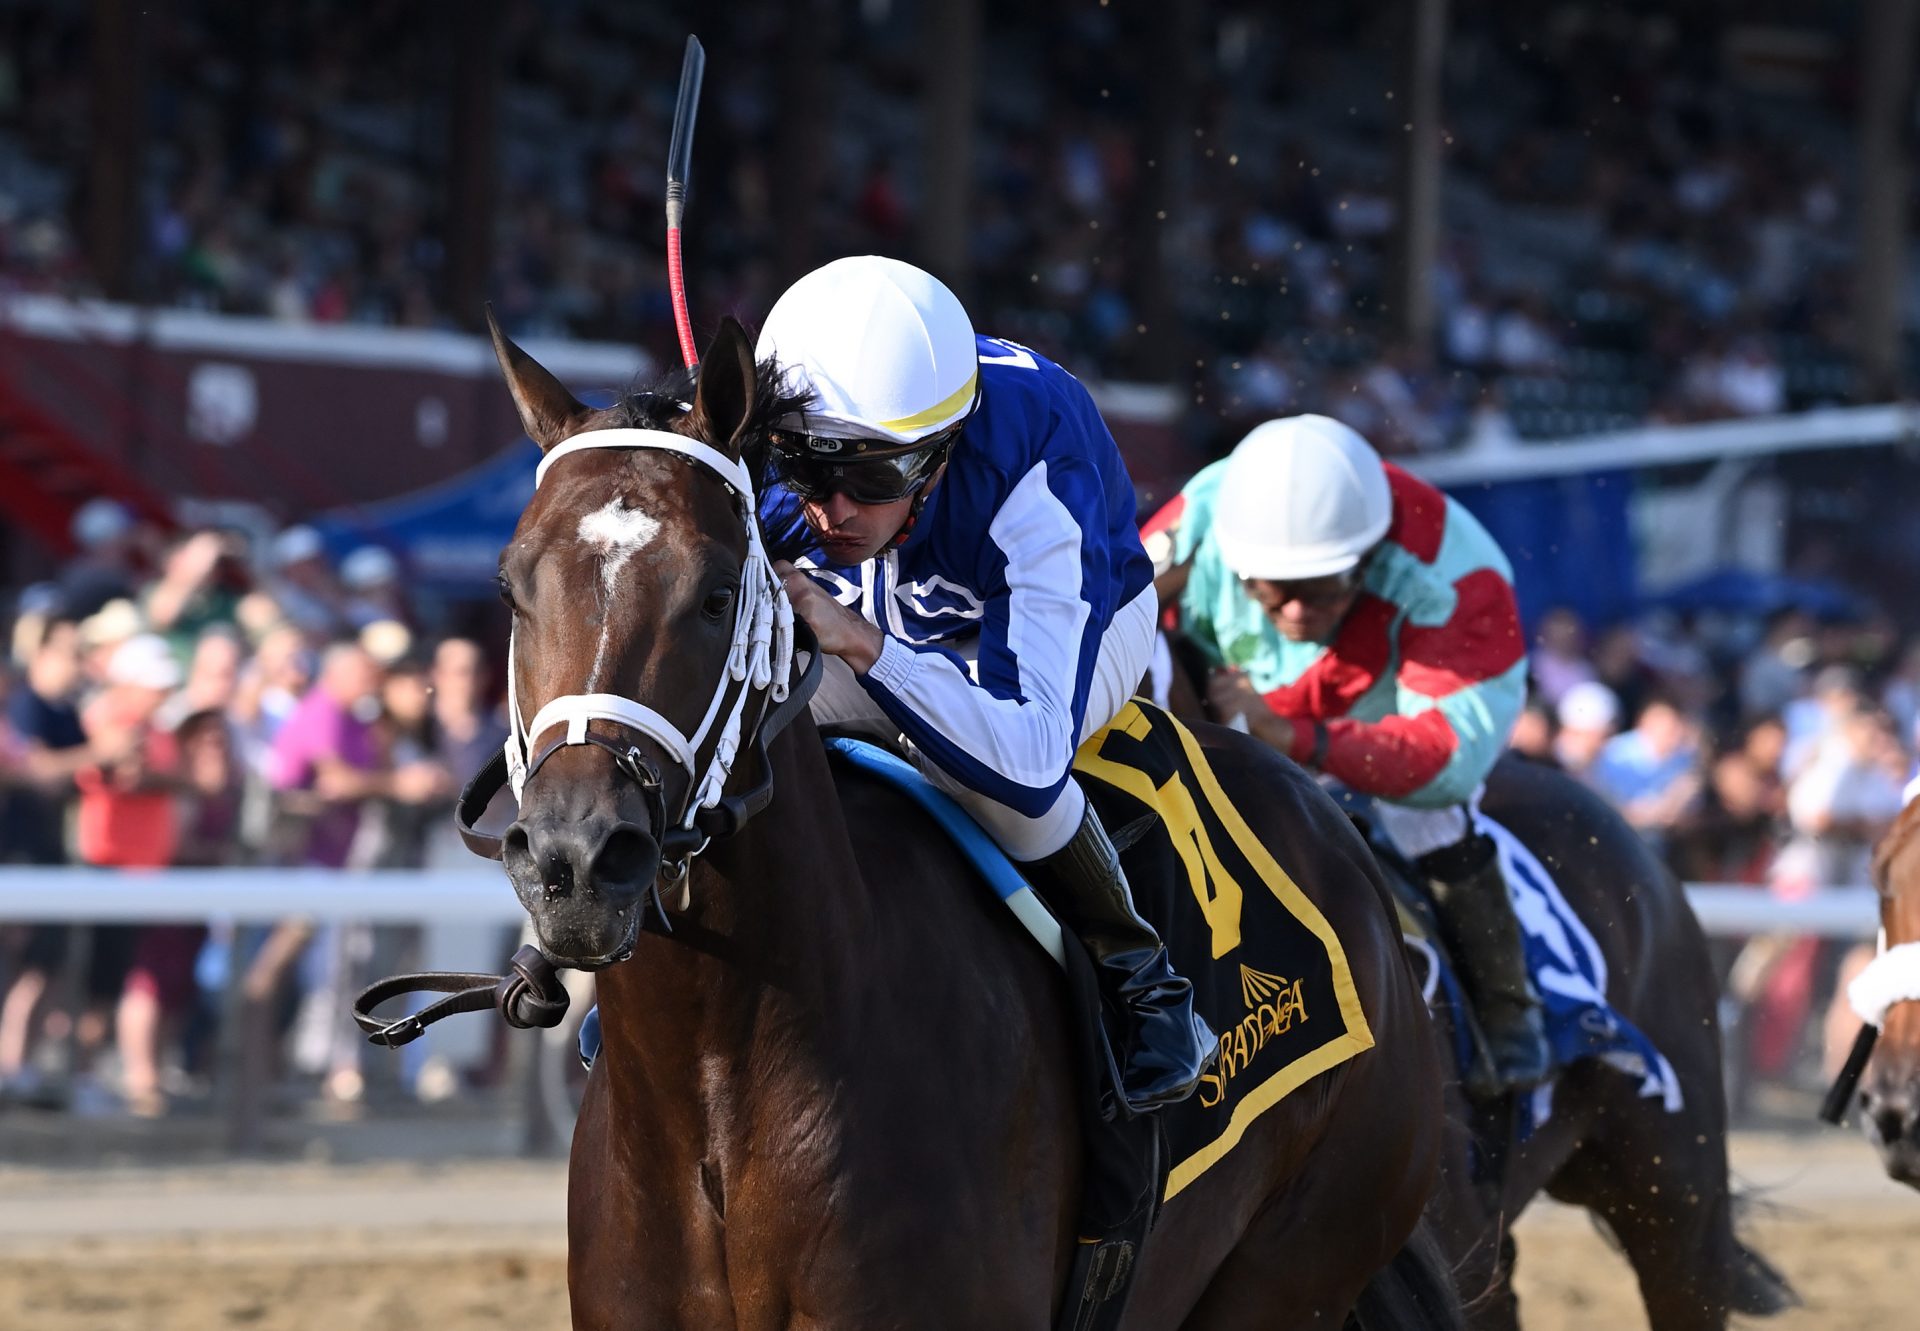 Mo Strike (Uncle Mo) winning the Gr.3 Sanford Stakes at Saratoga